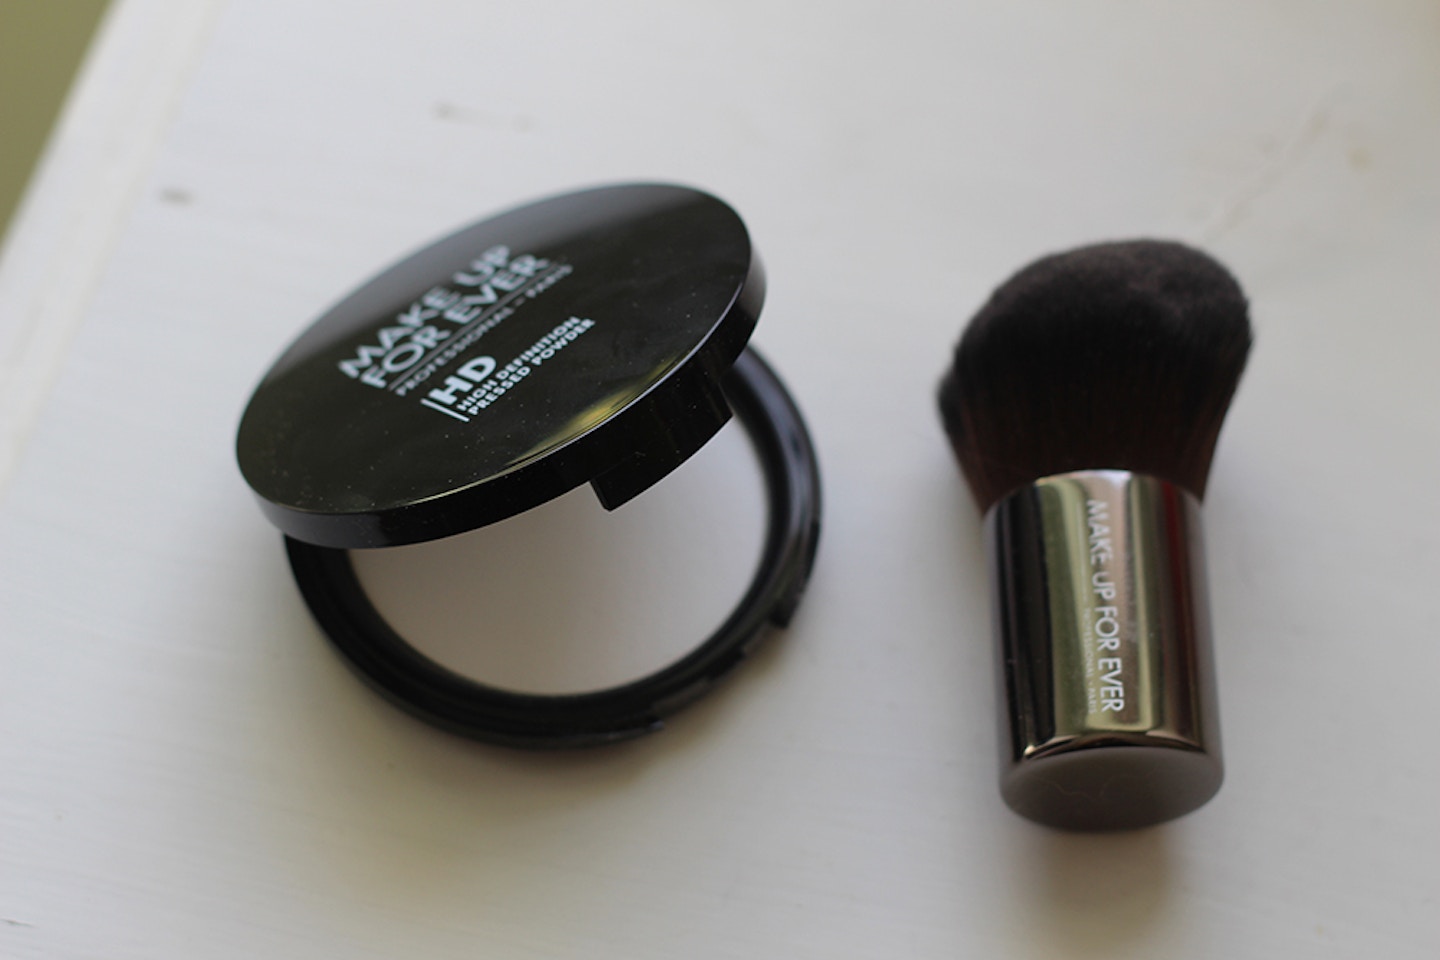 Review: Make Up For Ever HD Pressed Powder